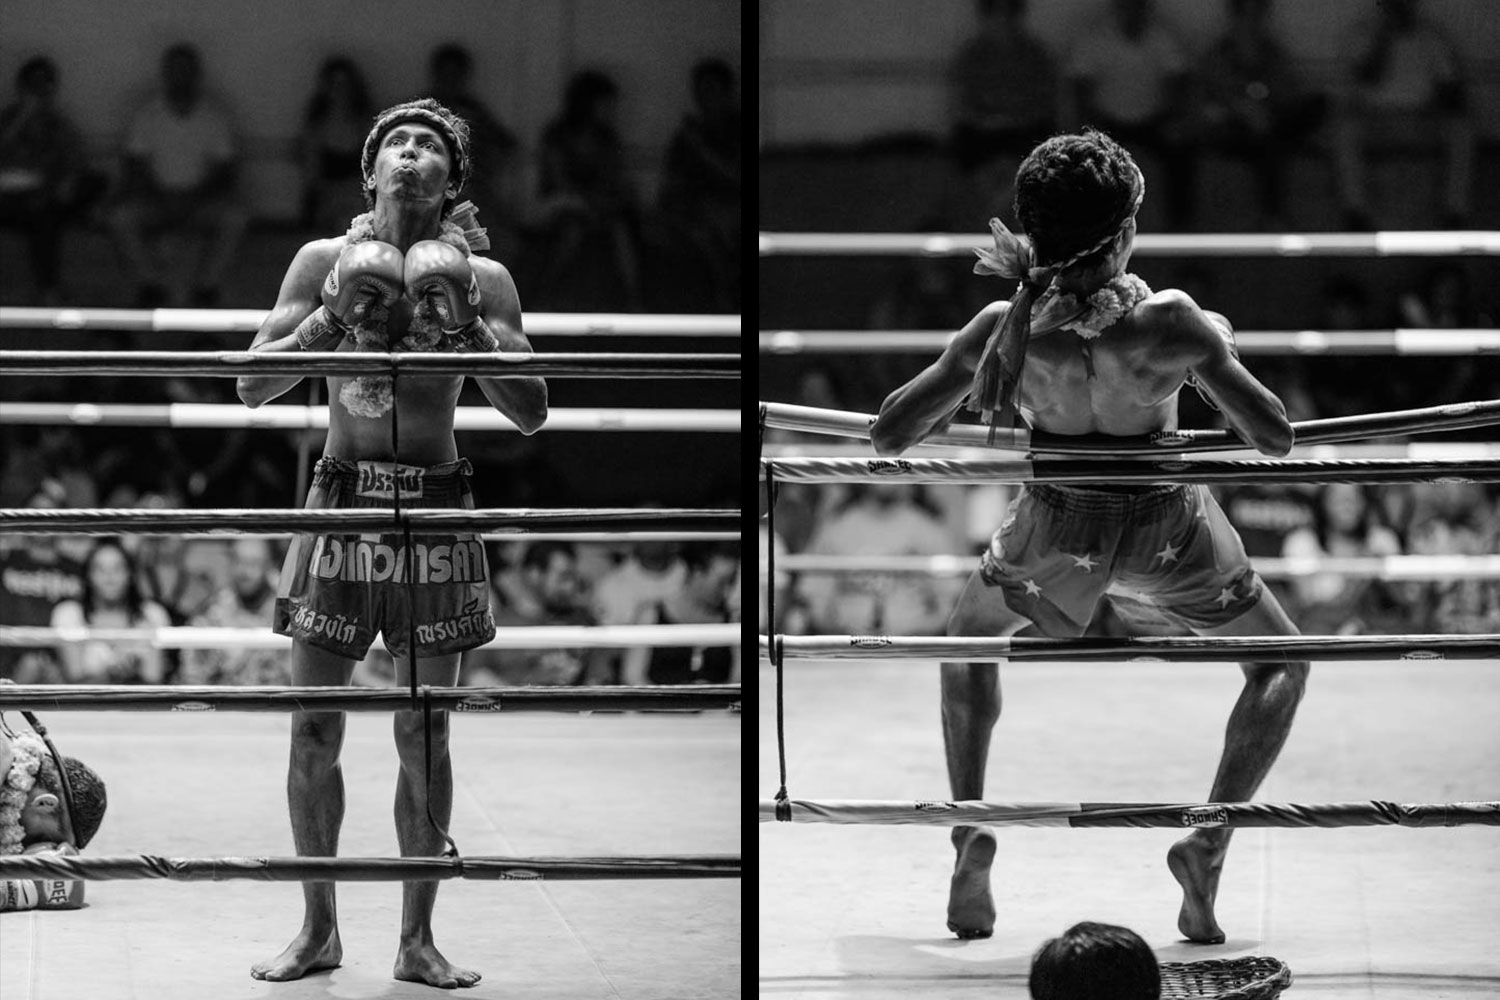 Muay Thai fighter leaning against the ring ropes